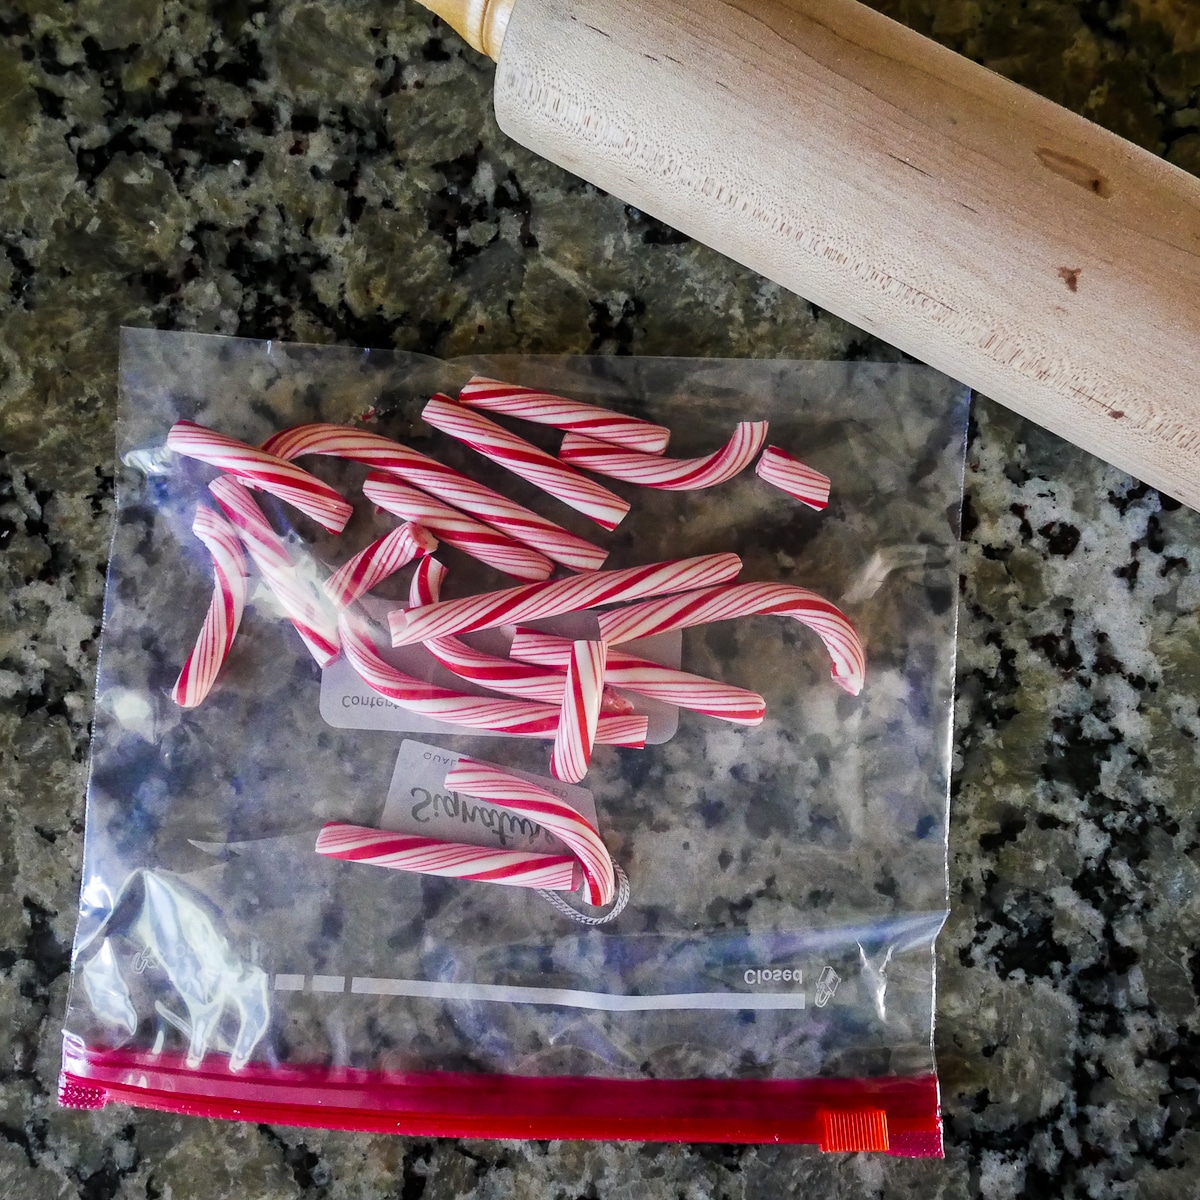 small plastic bag with candy canes and a rolling pin.